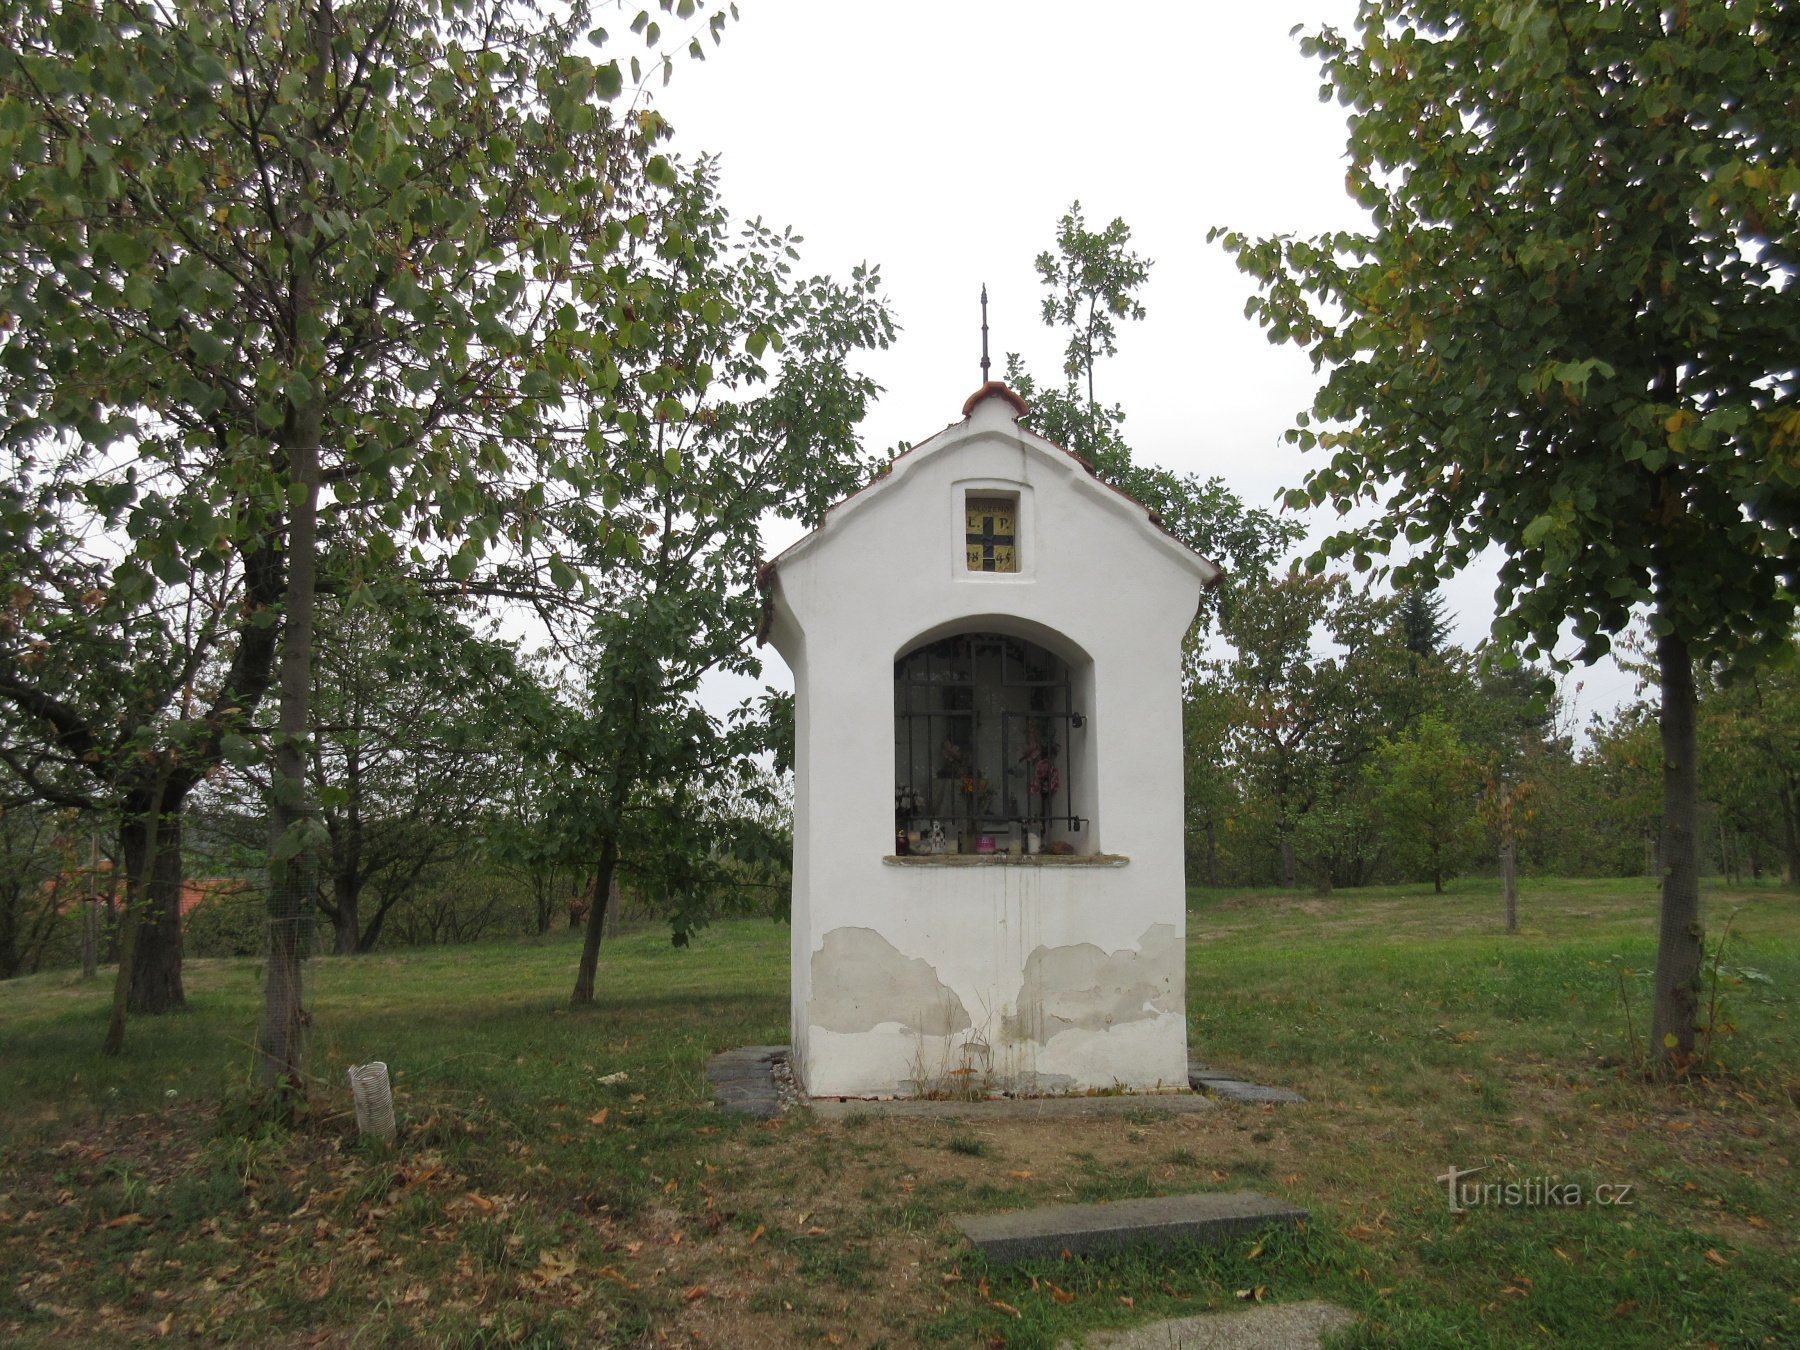 A chapel on the site of a prehistoric fort